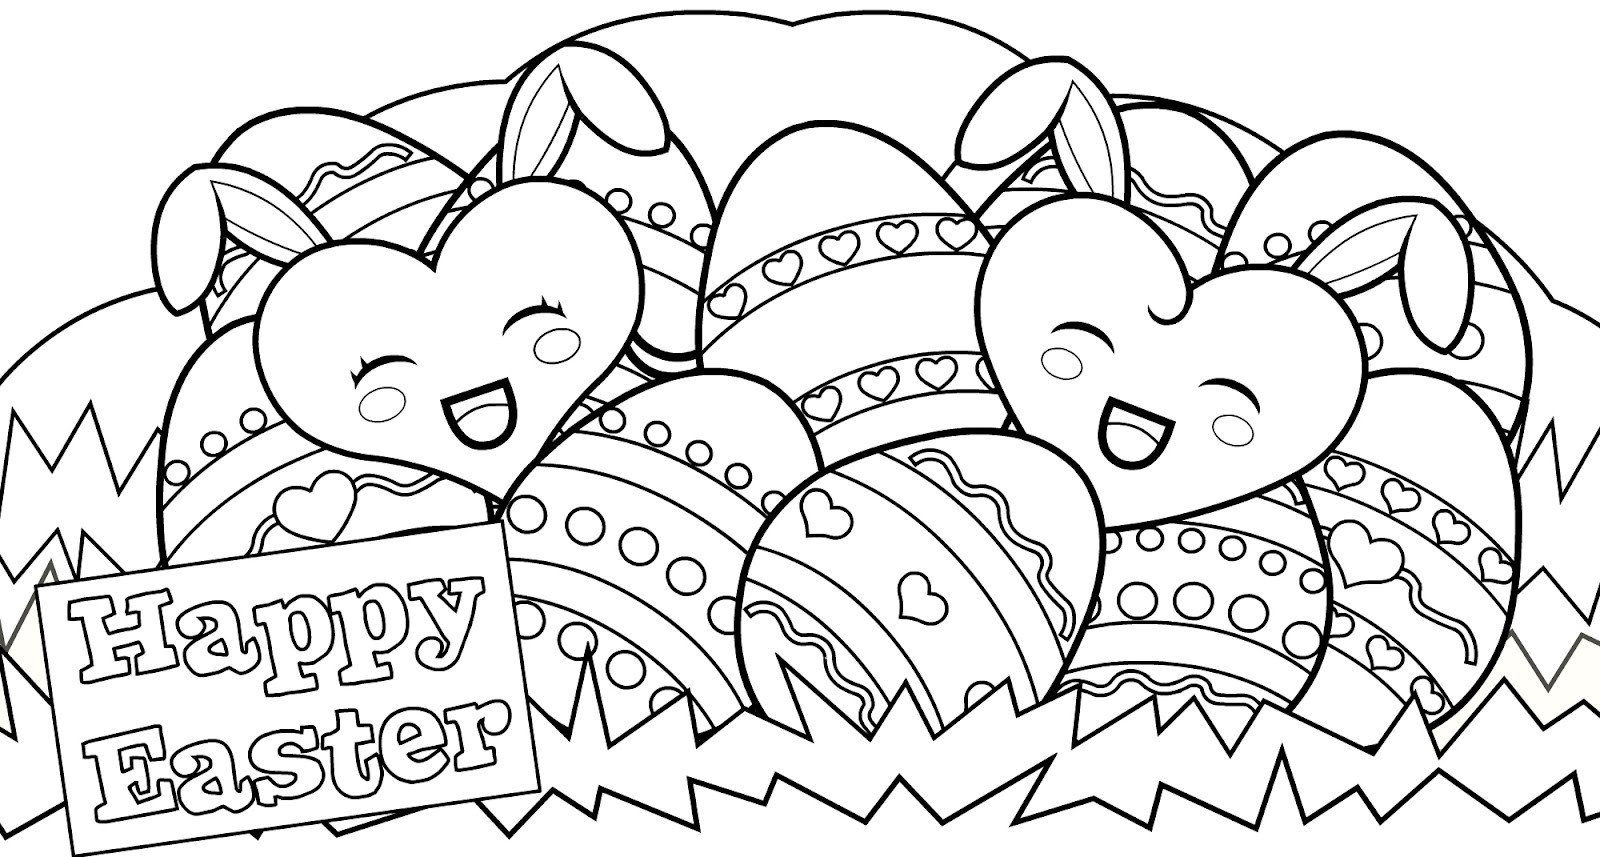 Happy Easter Coloring Pages Free Printable
 Free Easter Coloring Sheets